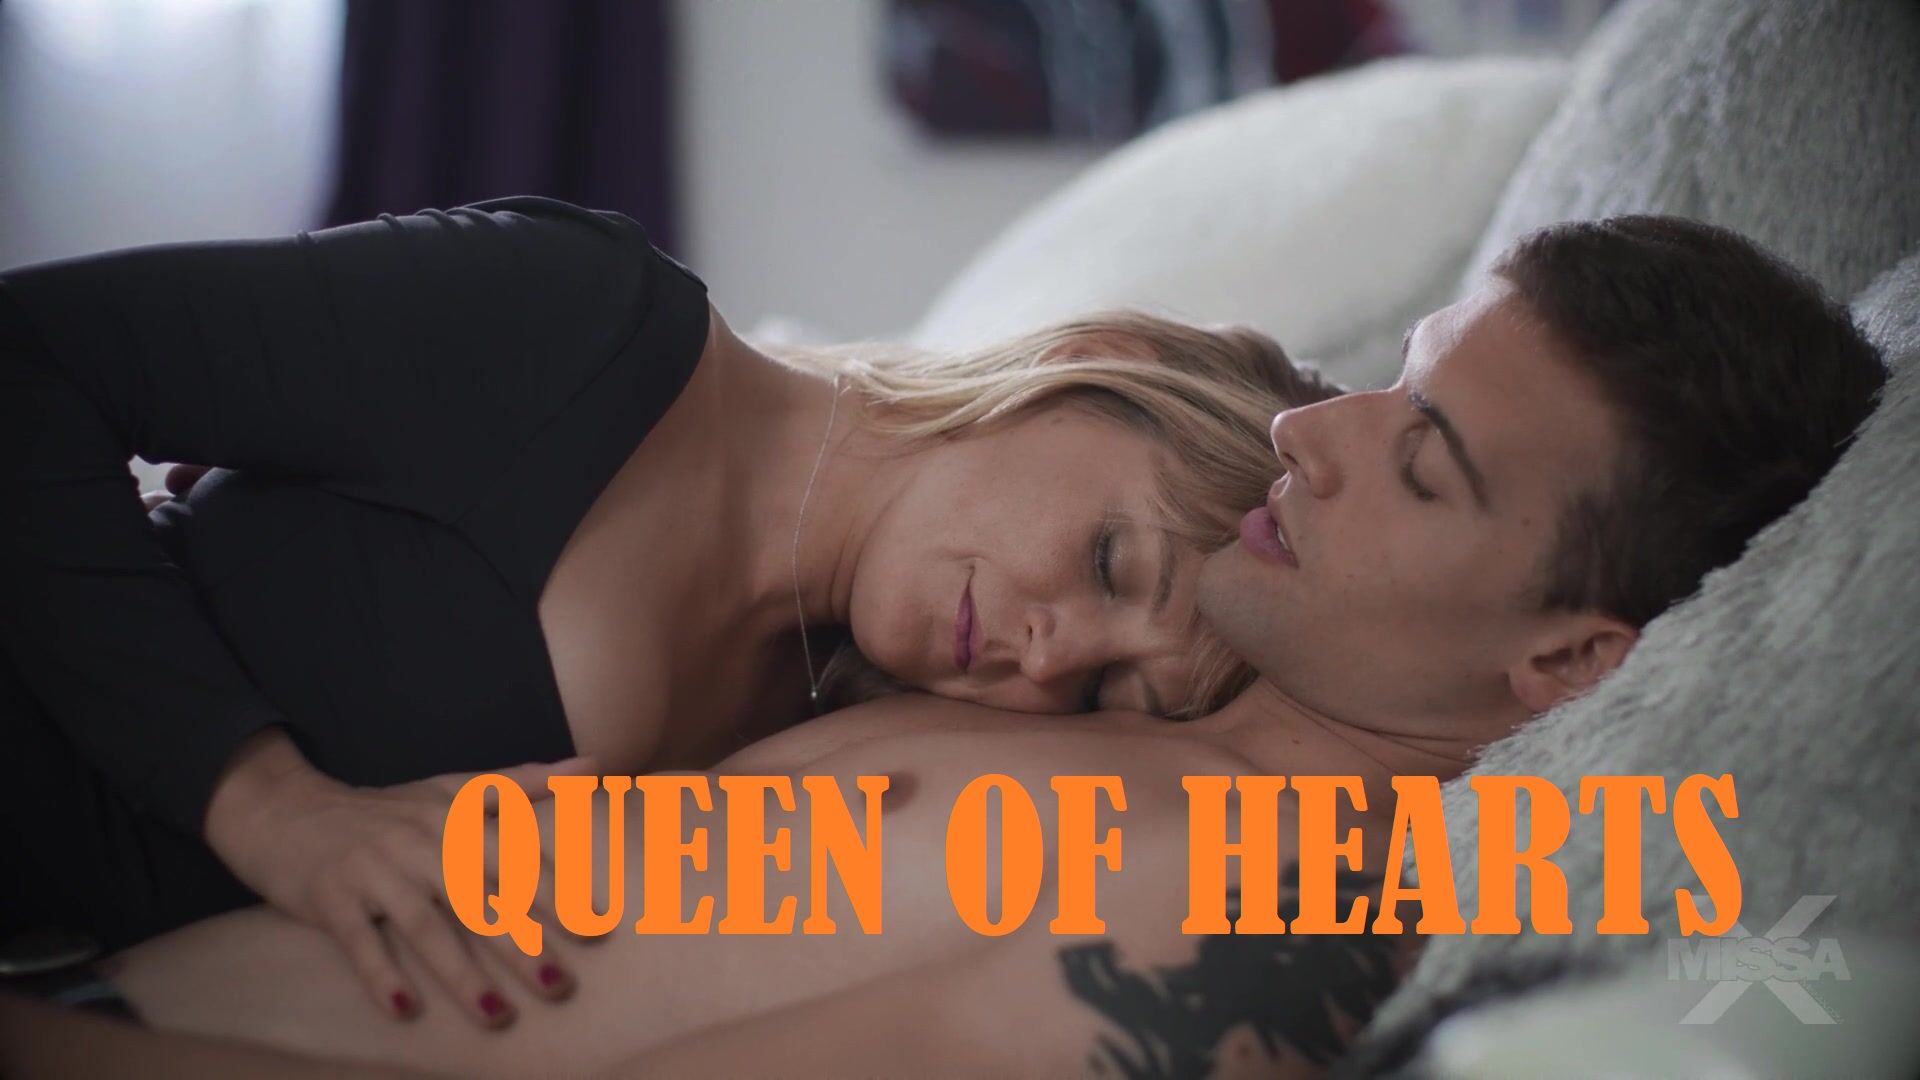 Xxx Romance Sleep Hd - Queen of Hearts HTML Porn Sex Game v.Ep. 2 v0.2 Download for Windows,  MacOS, Linux